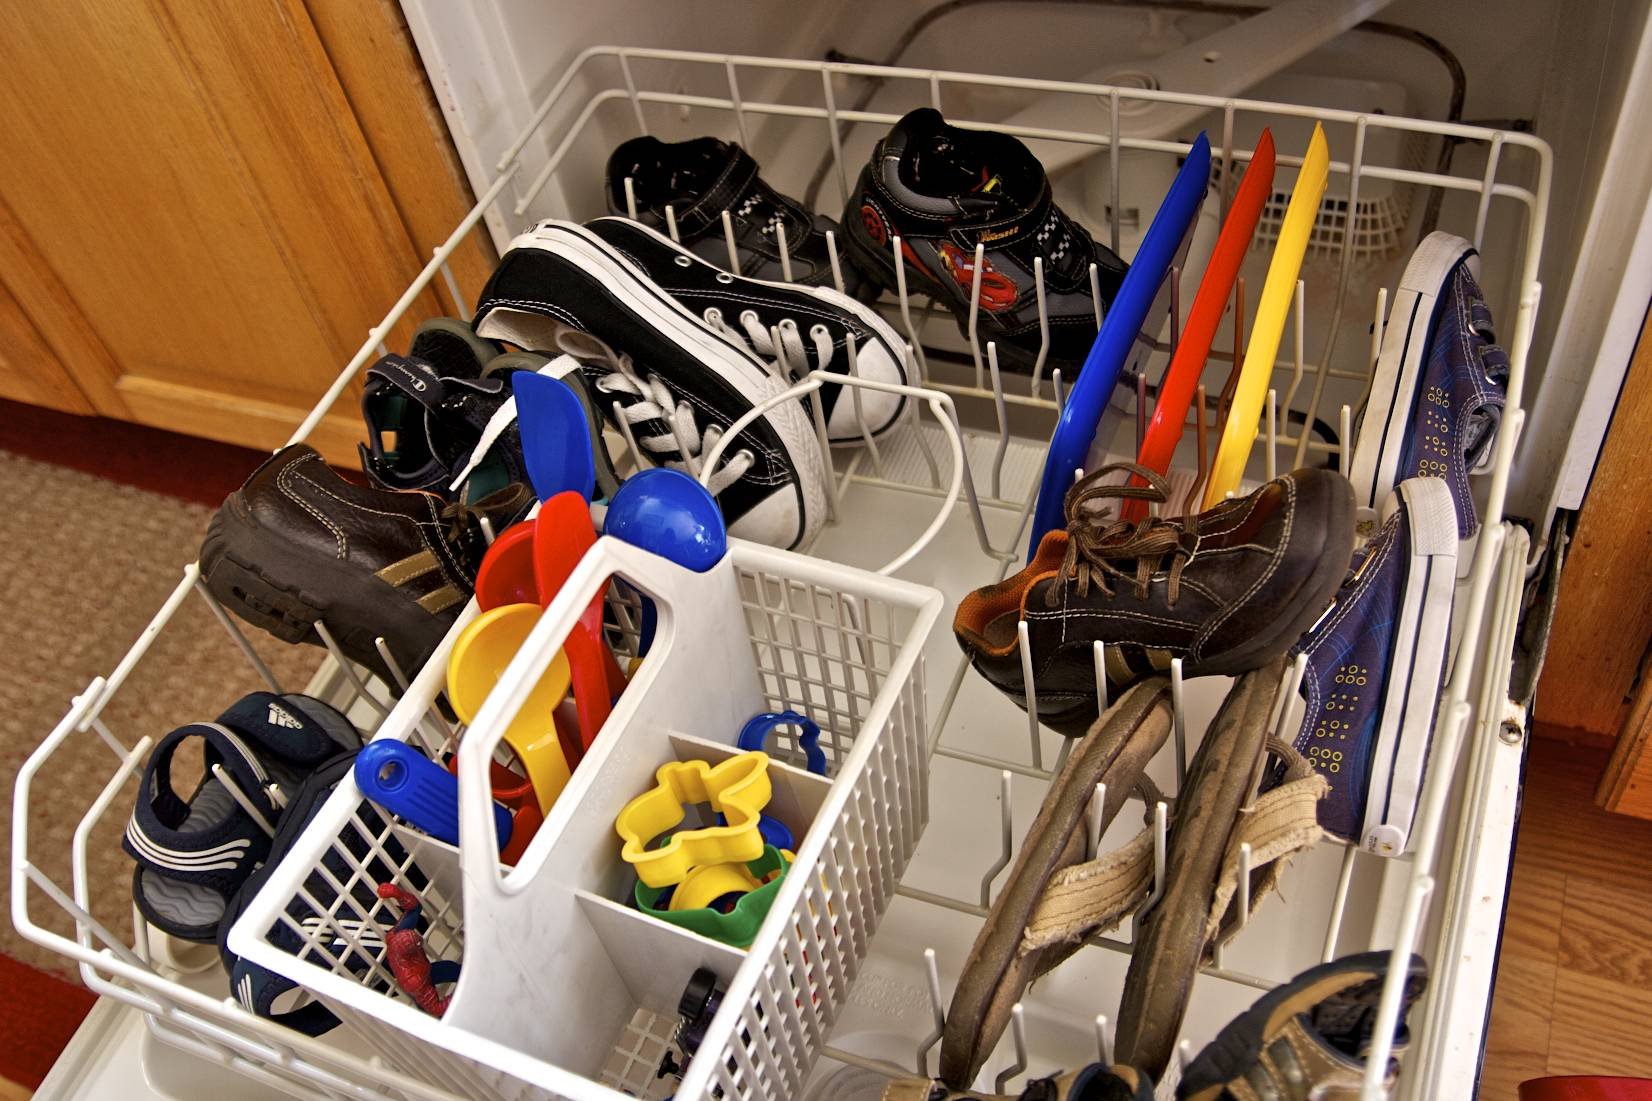 shoes in dishwasher